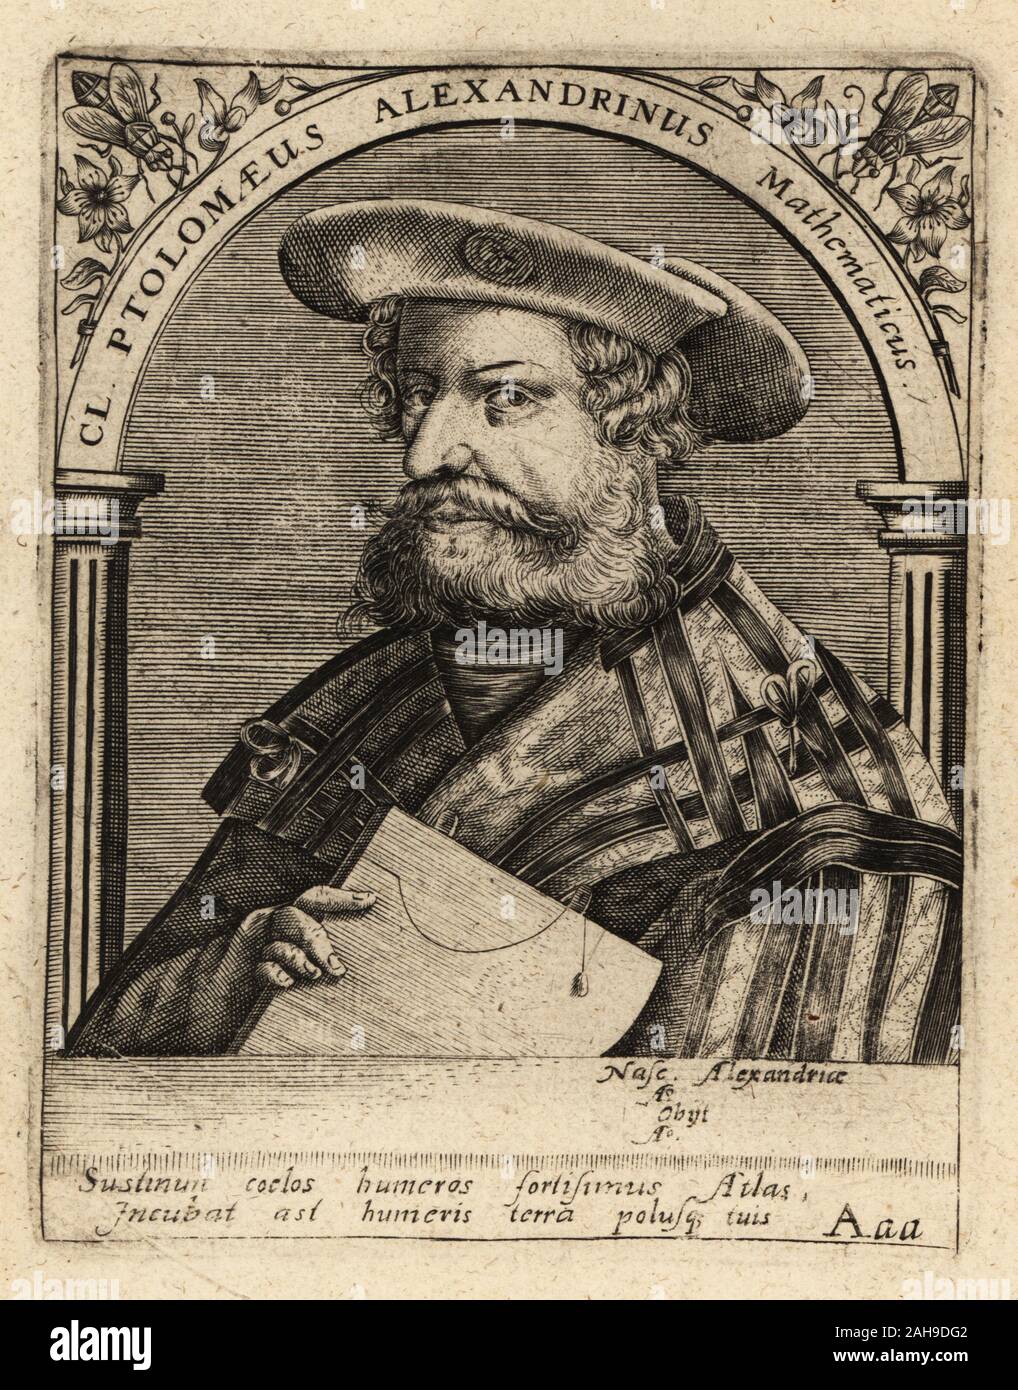 Nicolaus Germanus, German cartographer who published an edition of Jacopo d'Angelo's Latin translation of Ptolemy's Geography, c1420-1490. CL Ptolomaeus Alexandrinus Mathematicus. Copperplate engraving by Johann Theodore de Bry from Jean-Jacques Boissard’s Bibliotheca Chalcographica, Johann Ammonius, Frankfurt, 1650. Stock Photo